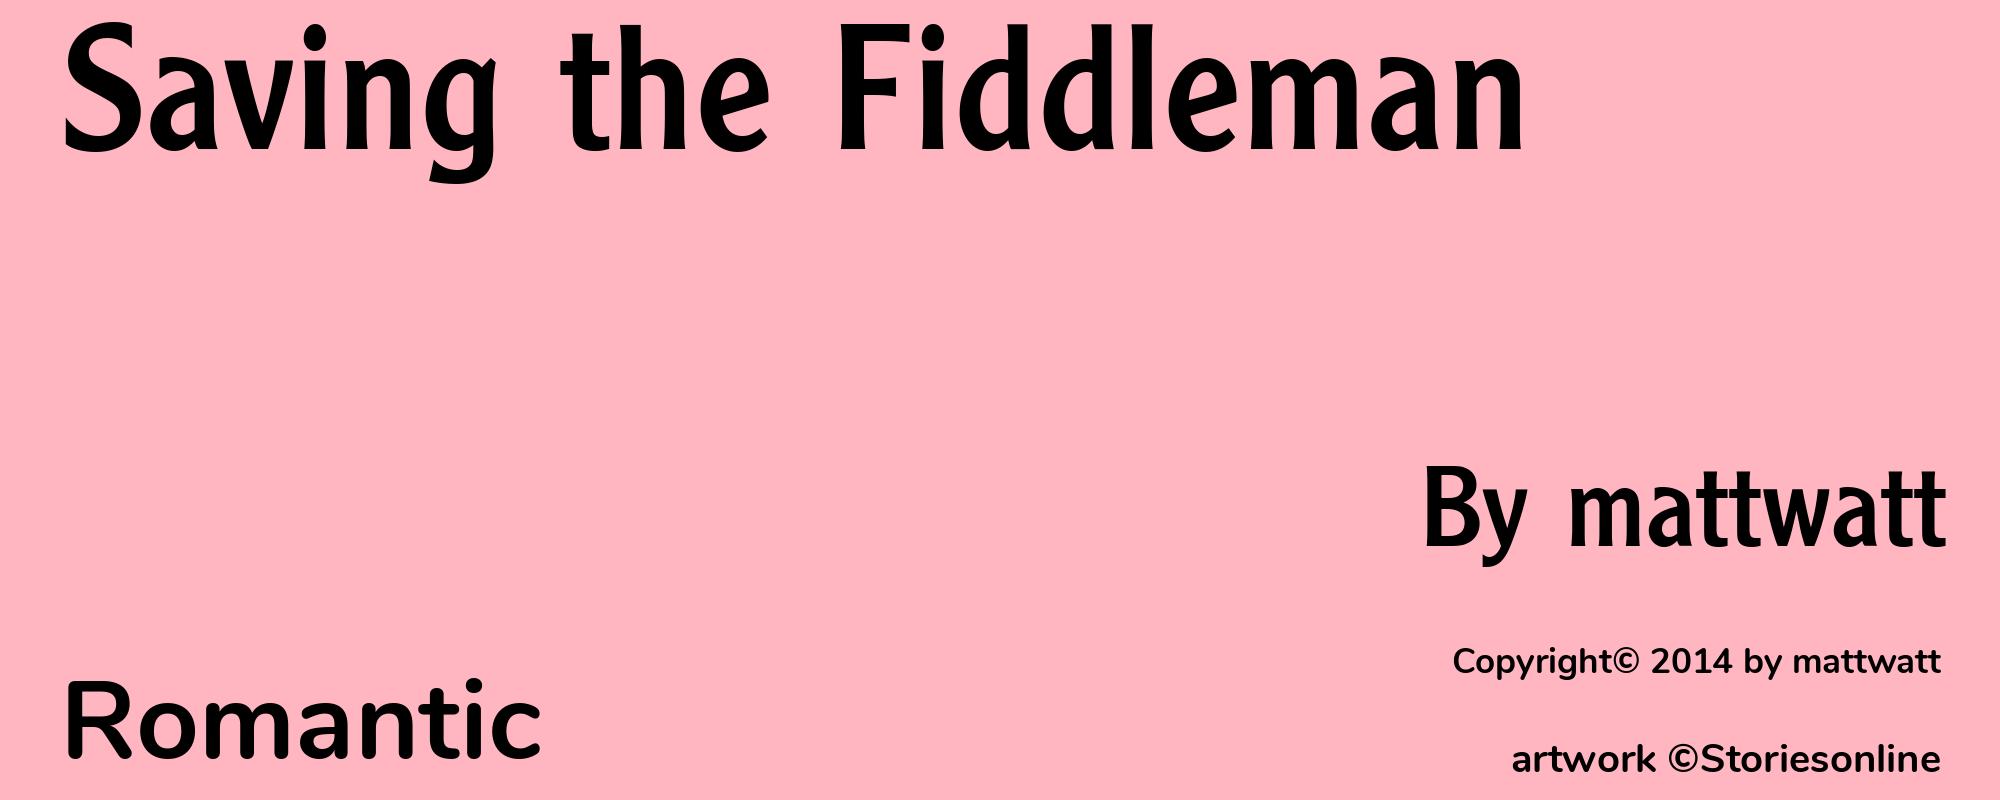 Saving the Fiddleman - Cover